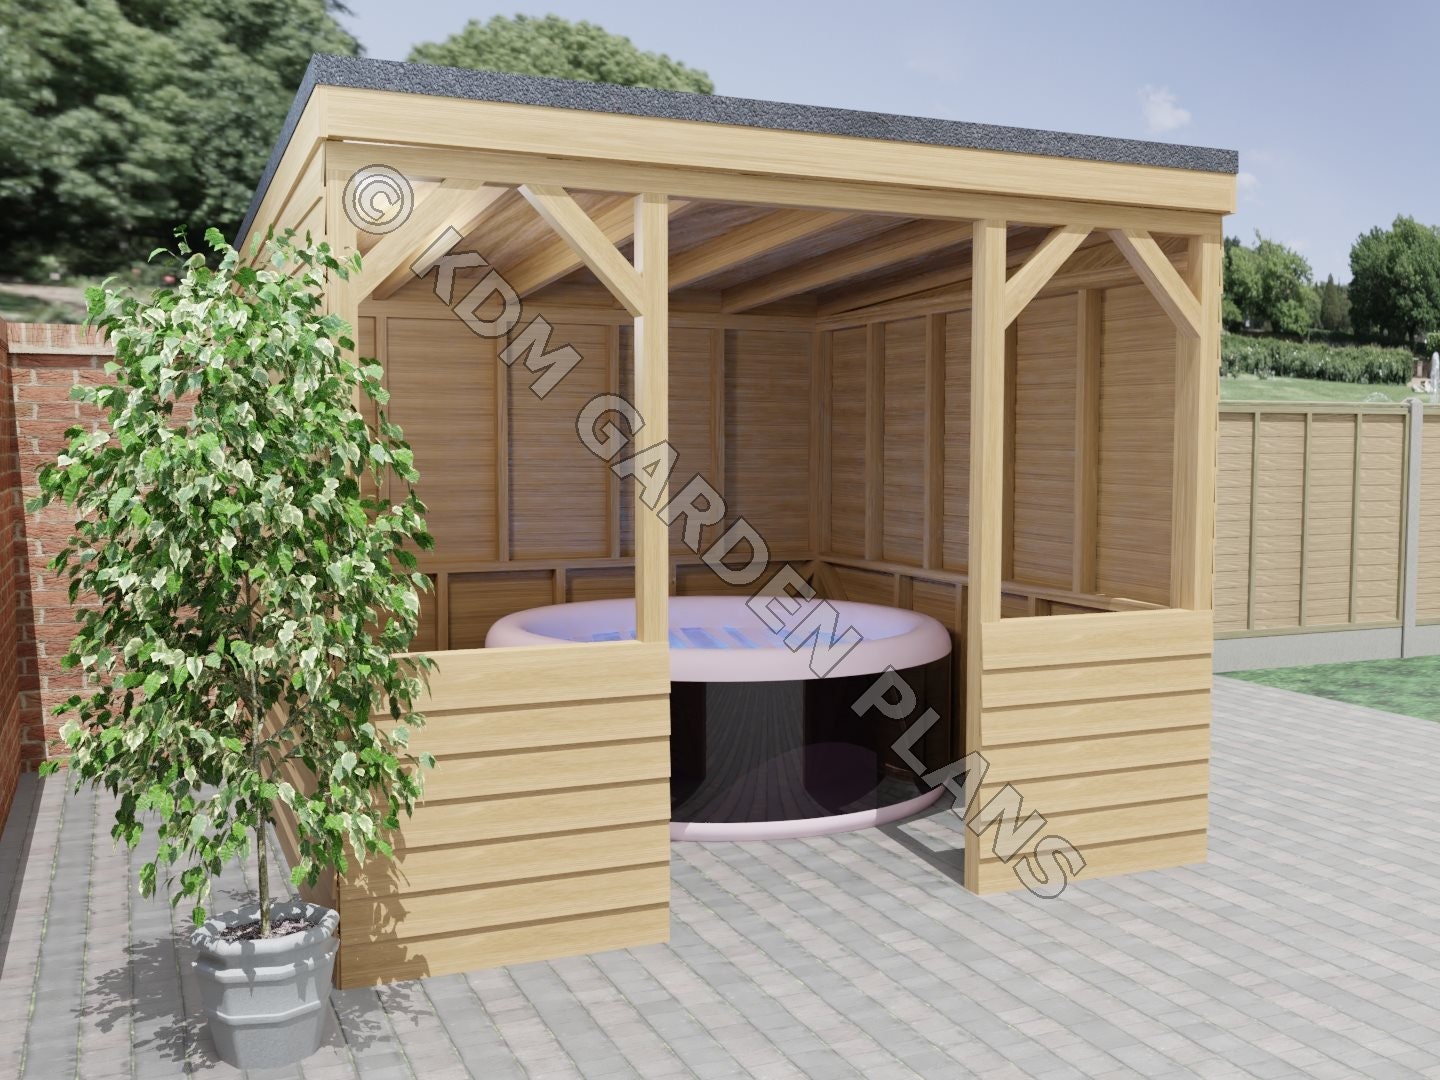 Hot Tub Shelter 3.0mx3.0m build Plans Only No Materials - Etsy